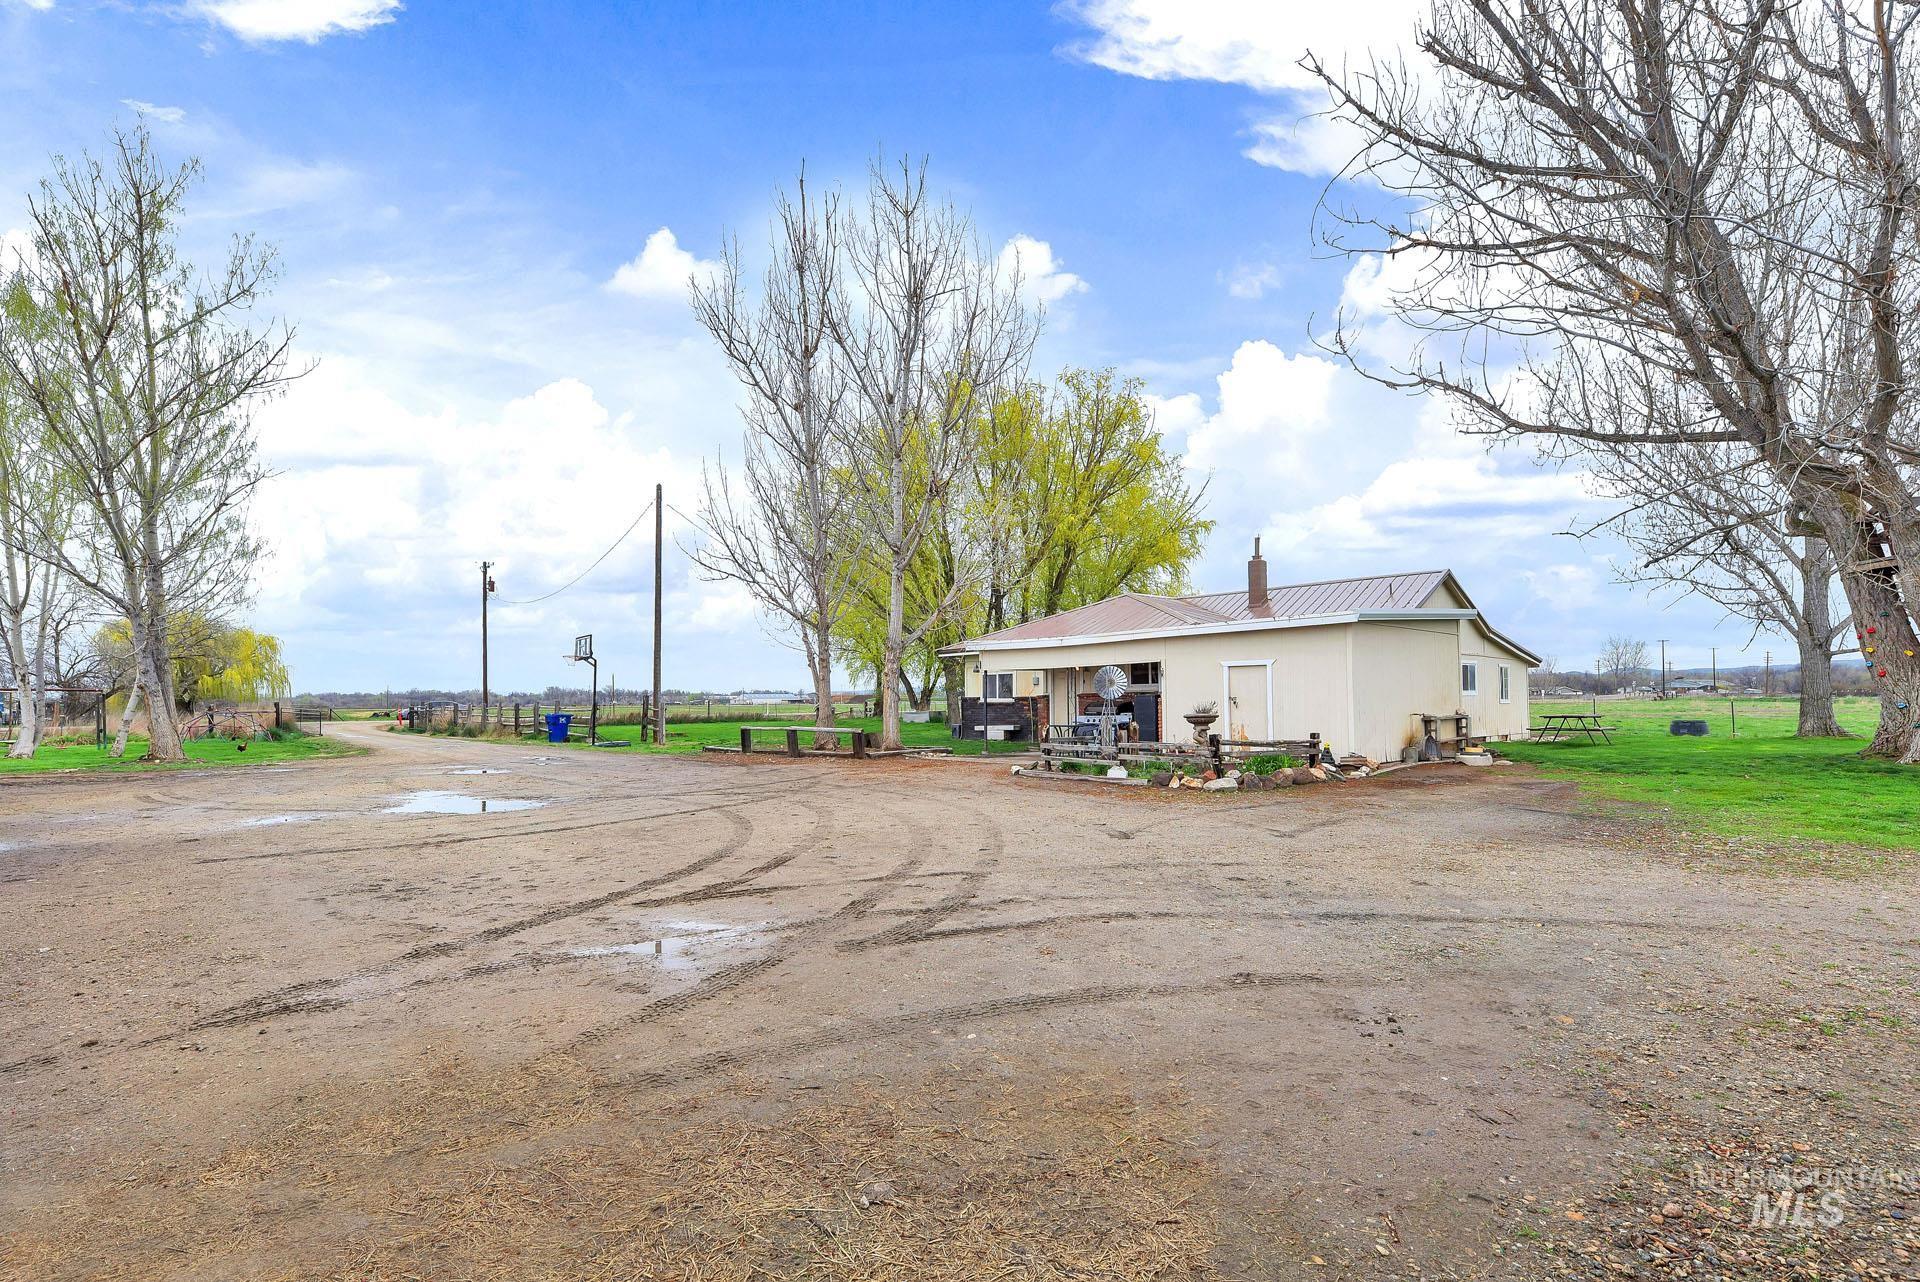 1115 NW 11th Ave, Payette, Idaho 83661, 4 Bedrooms, 1 Bathroom, Farm & Ranch For Sale, Price $949,900,MLS 98906201